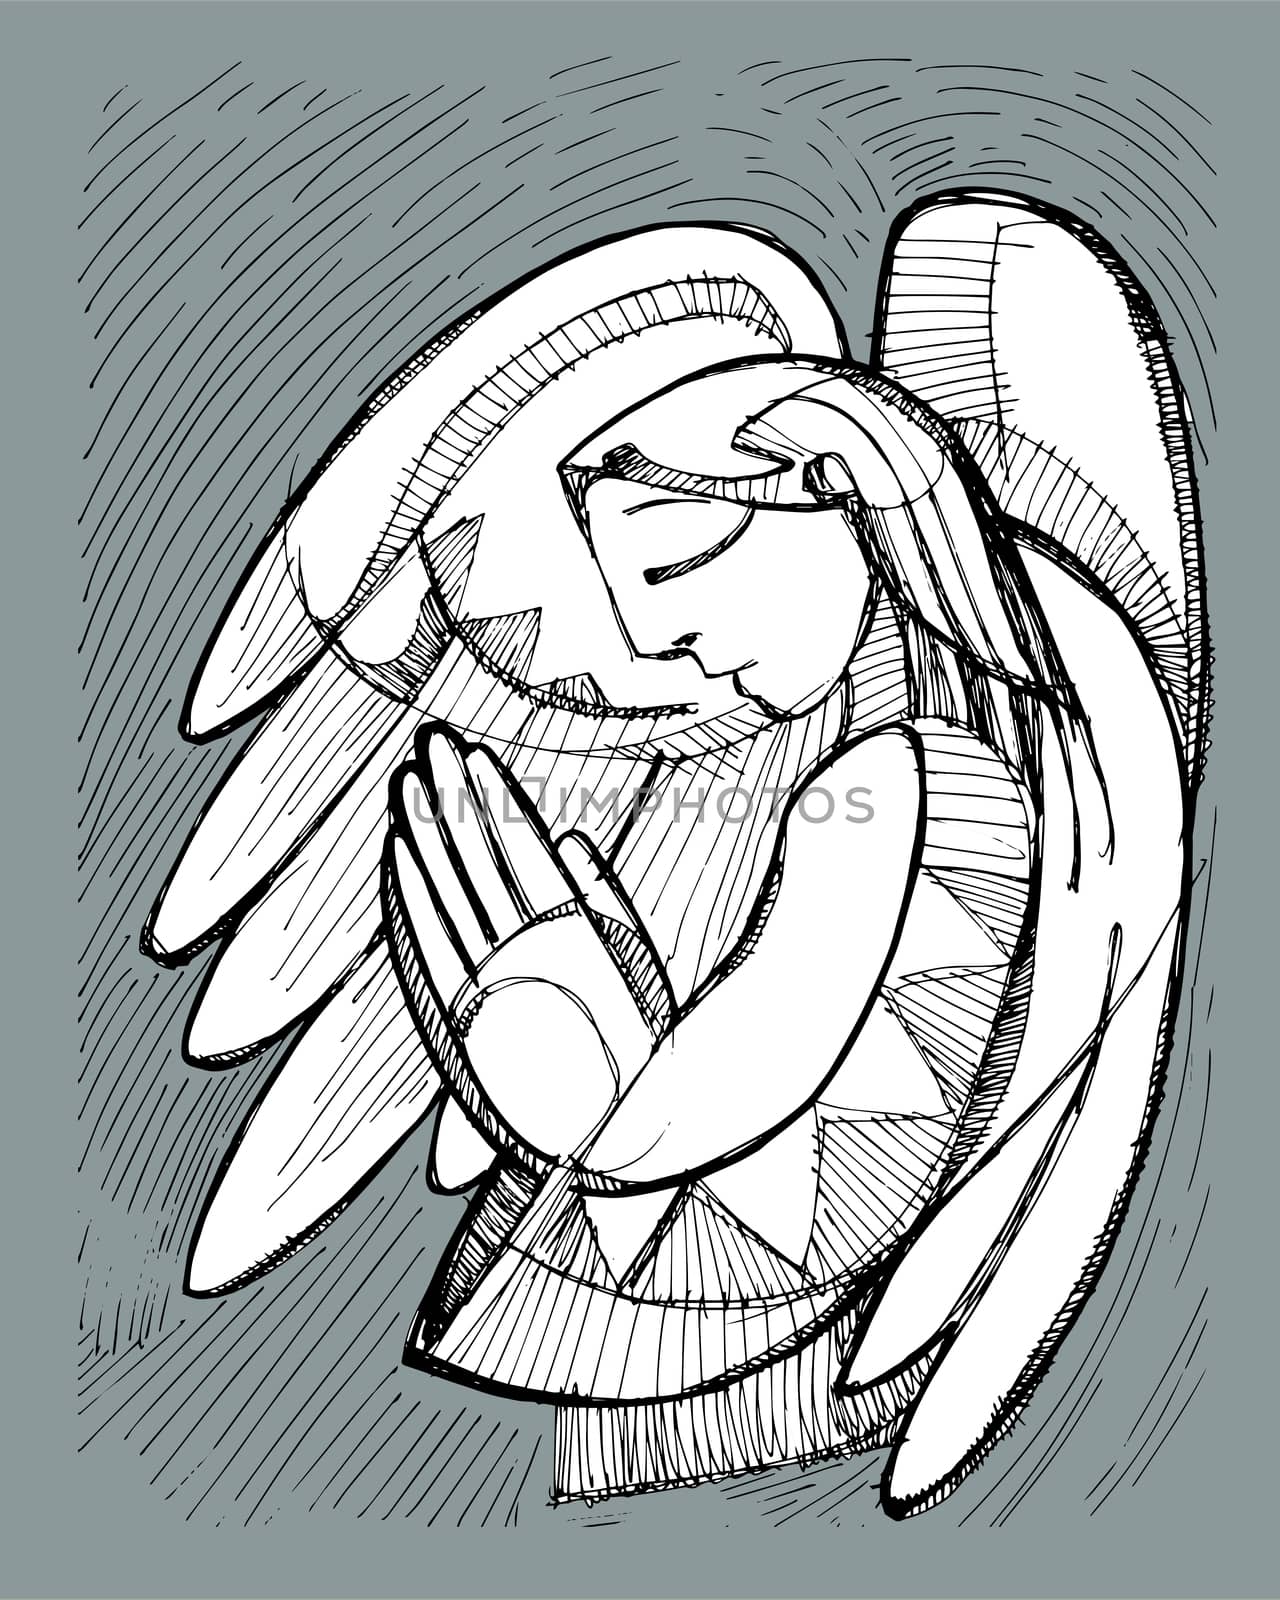 Hand drawn vector illustration or drawing of a praying Guardian Angel